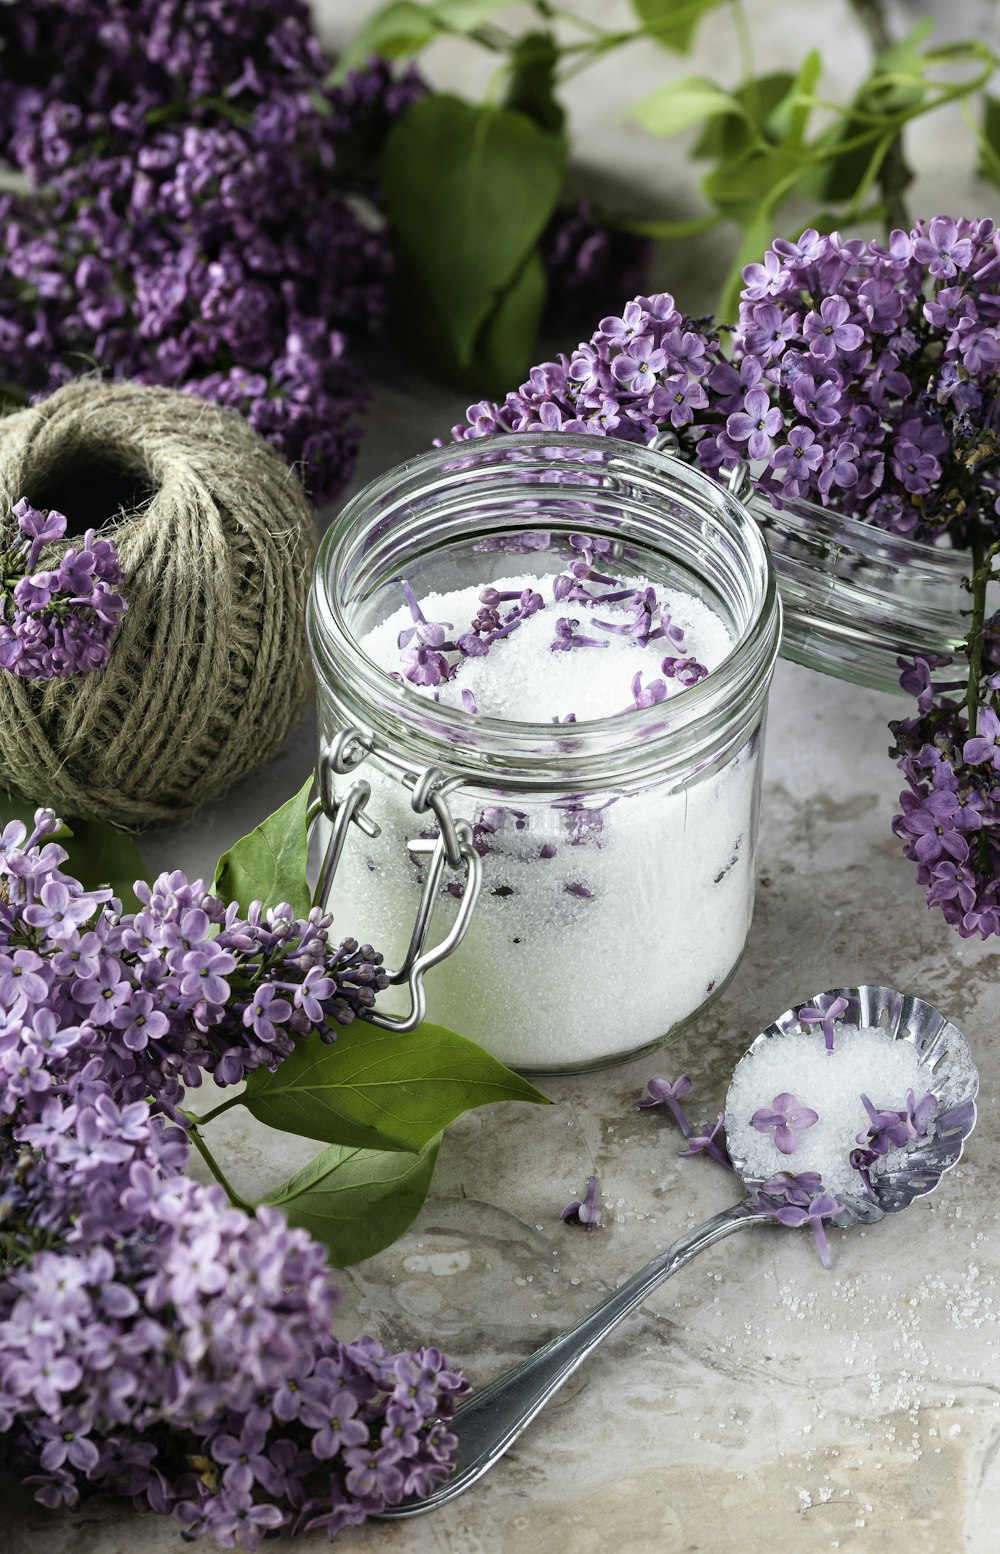 a jar filled with lavender flowers next to a ball of twine